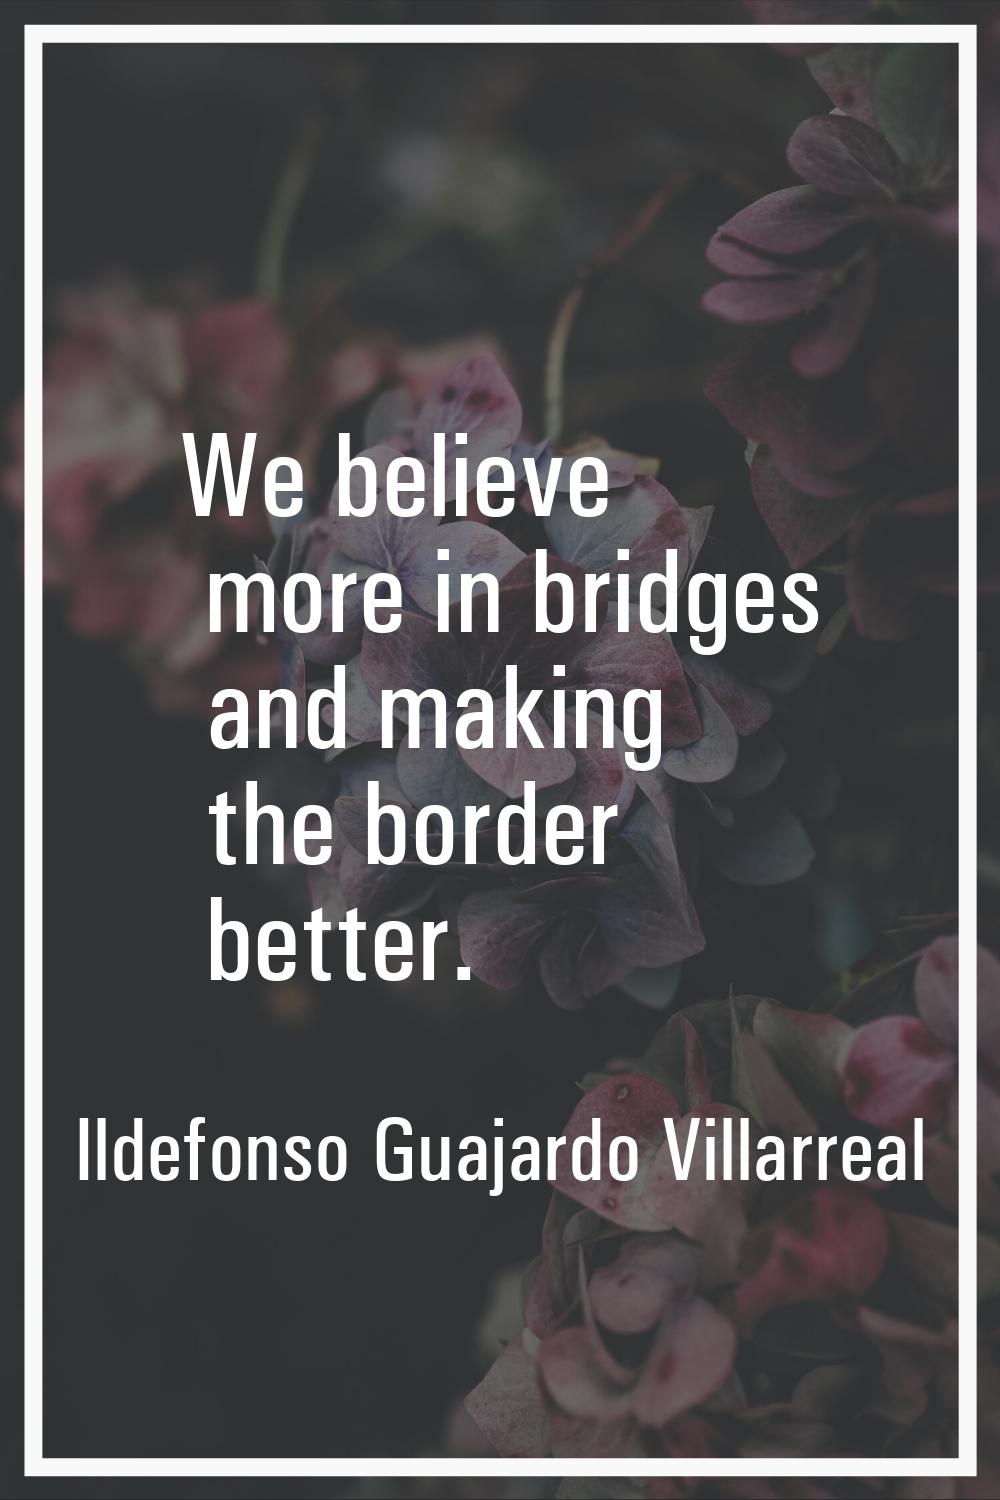 We believe more in bridges and making the border better.